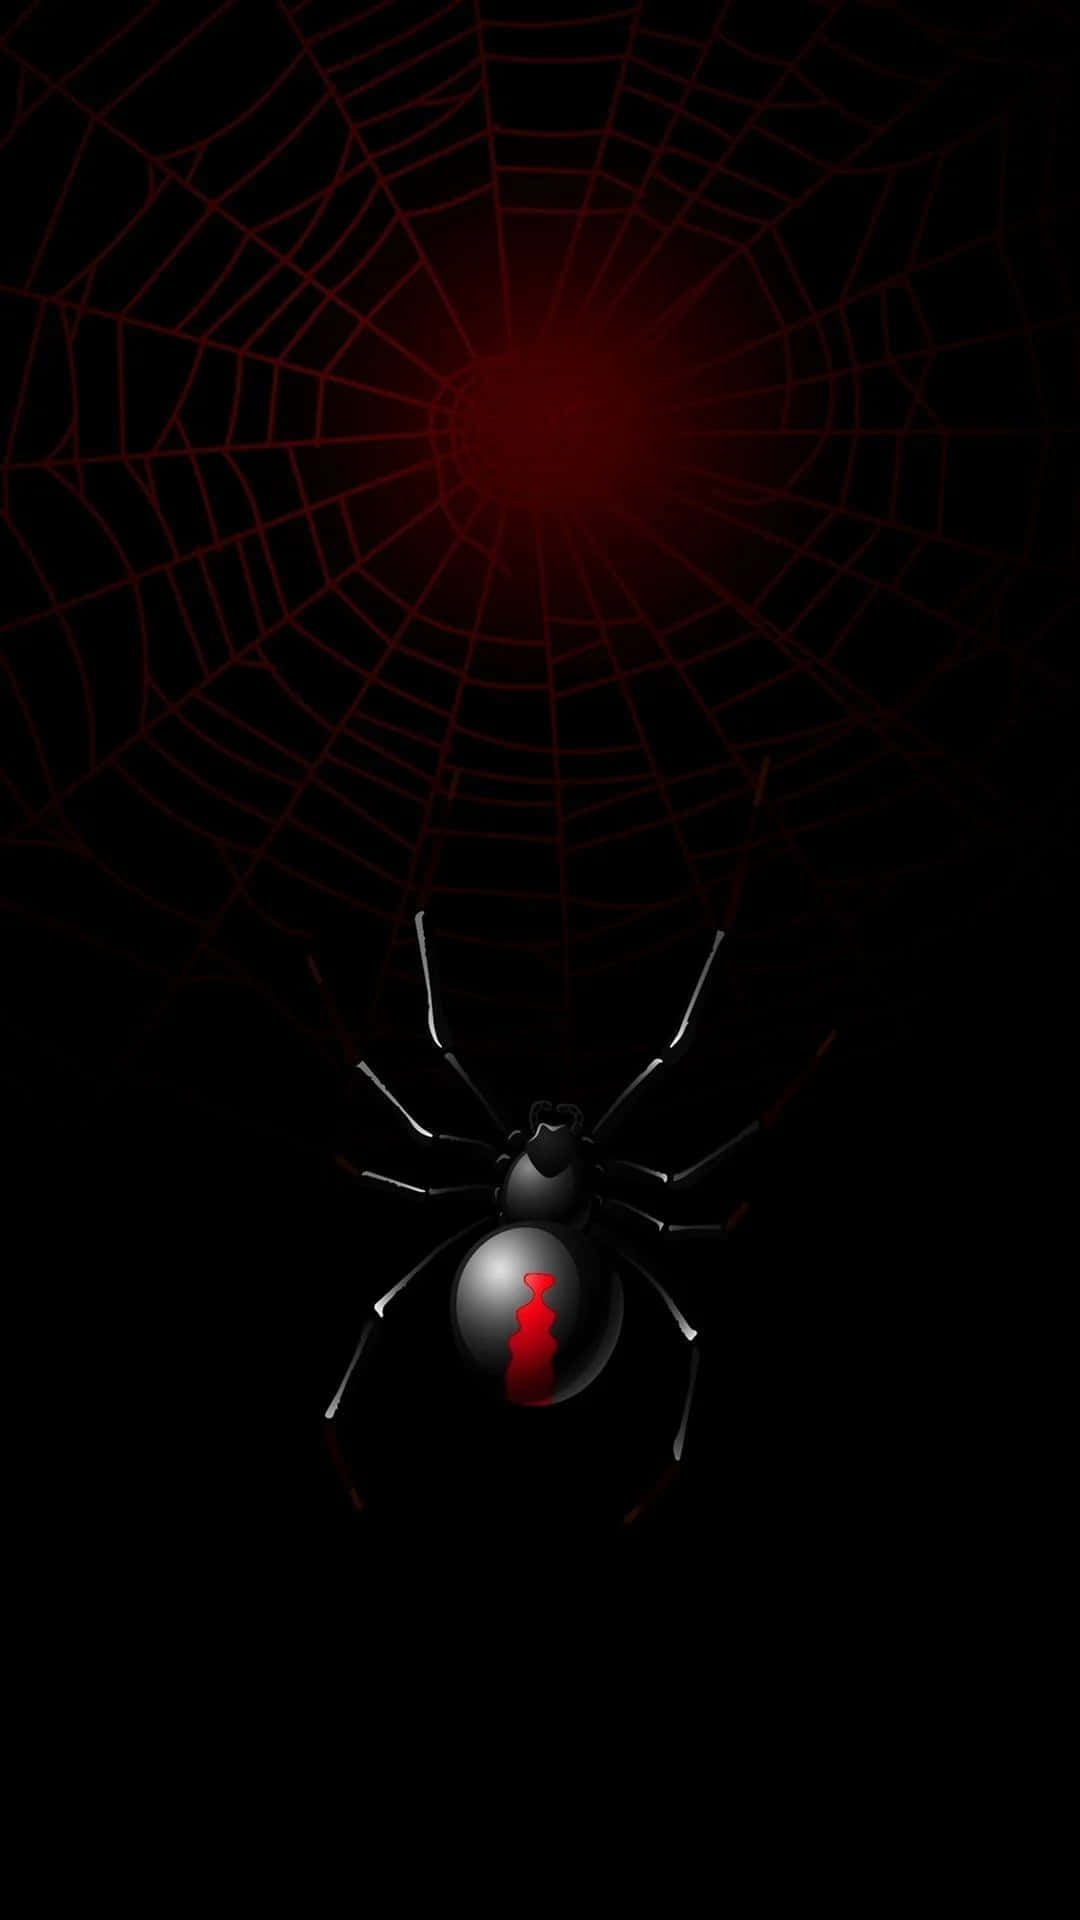 A Black Spider In A Web With Red Light